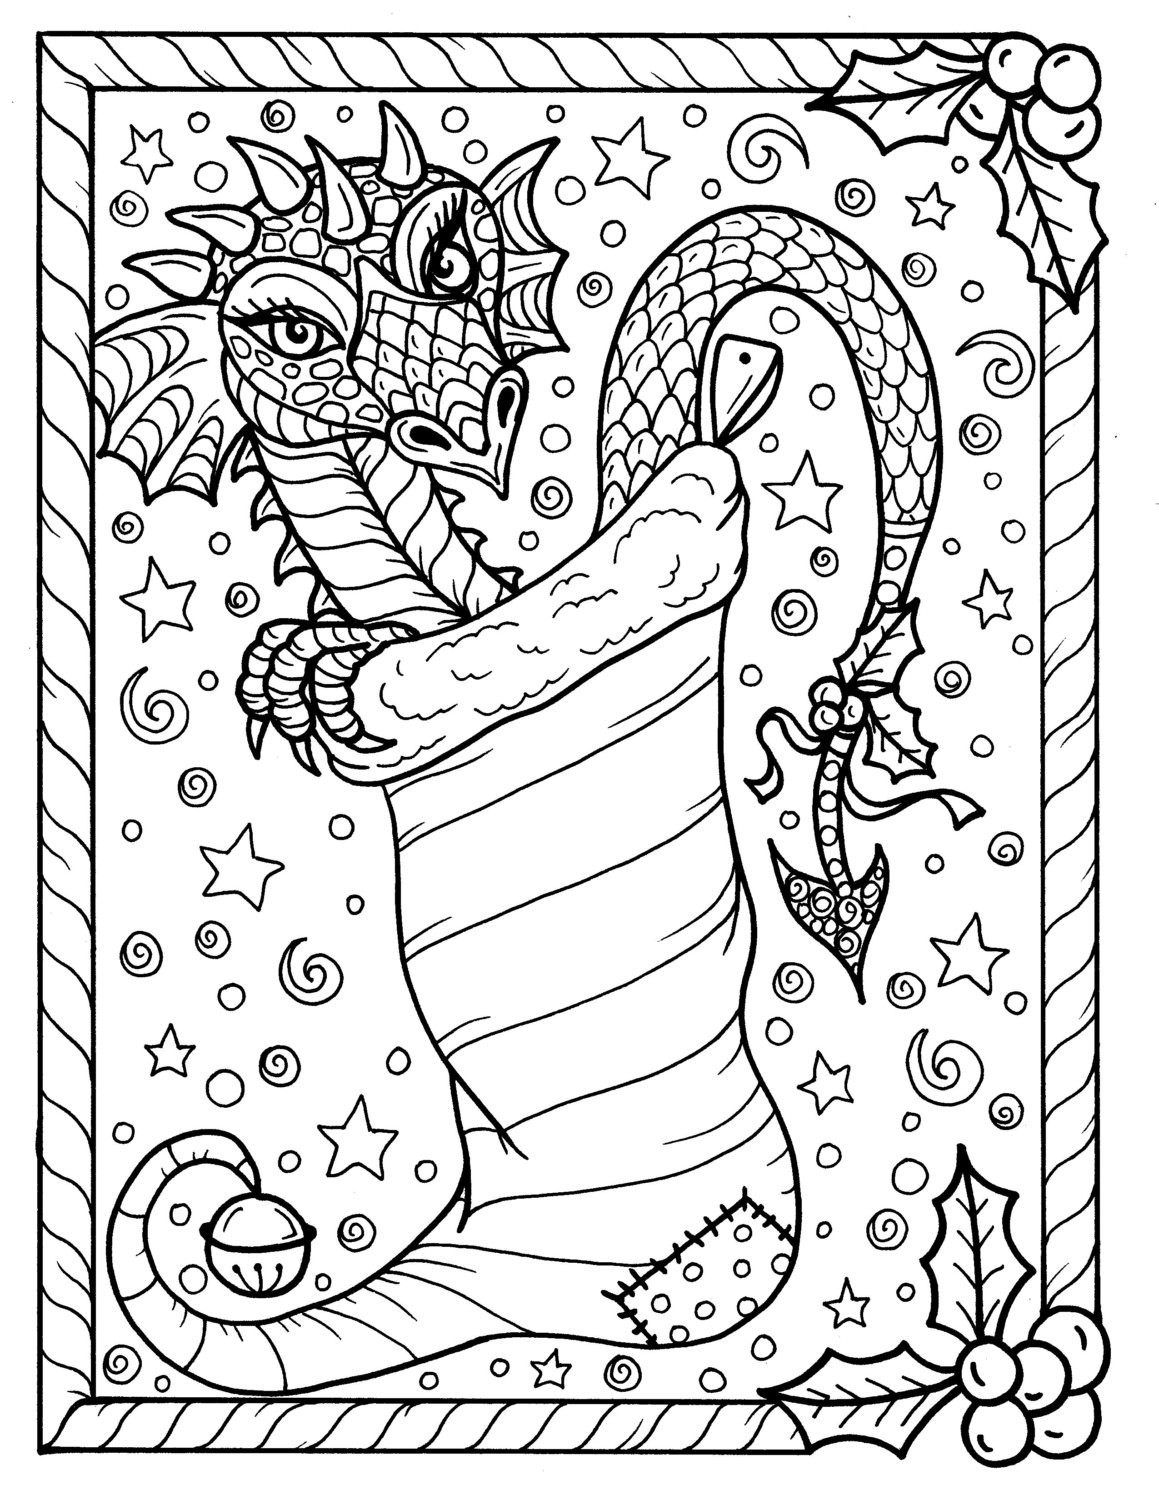 Christmas Coloring Book For Adults
 Dragon Christmas Coloring page Digital JPG file Adult color